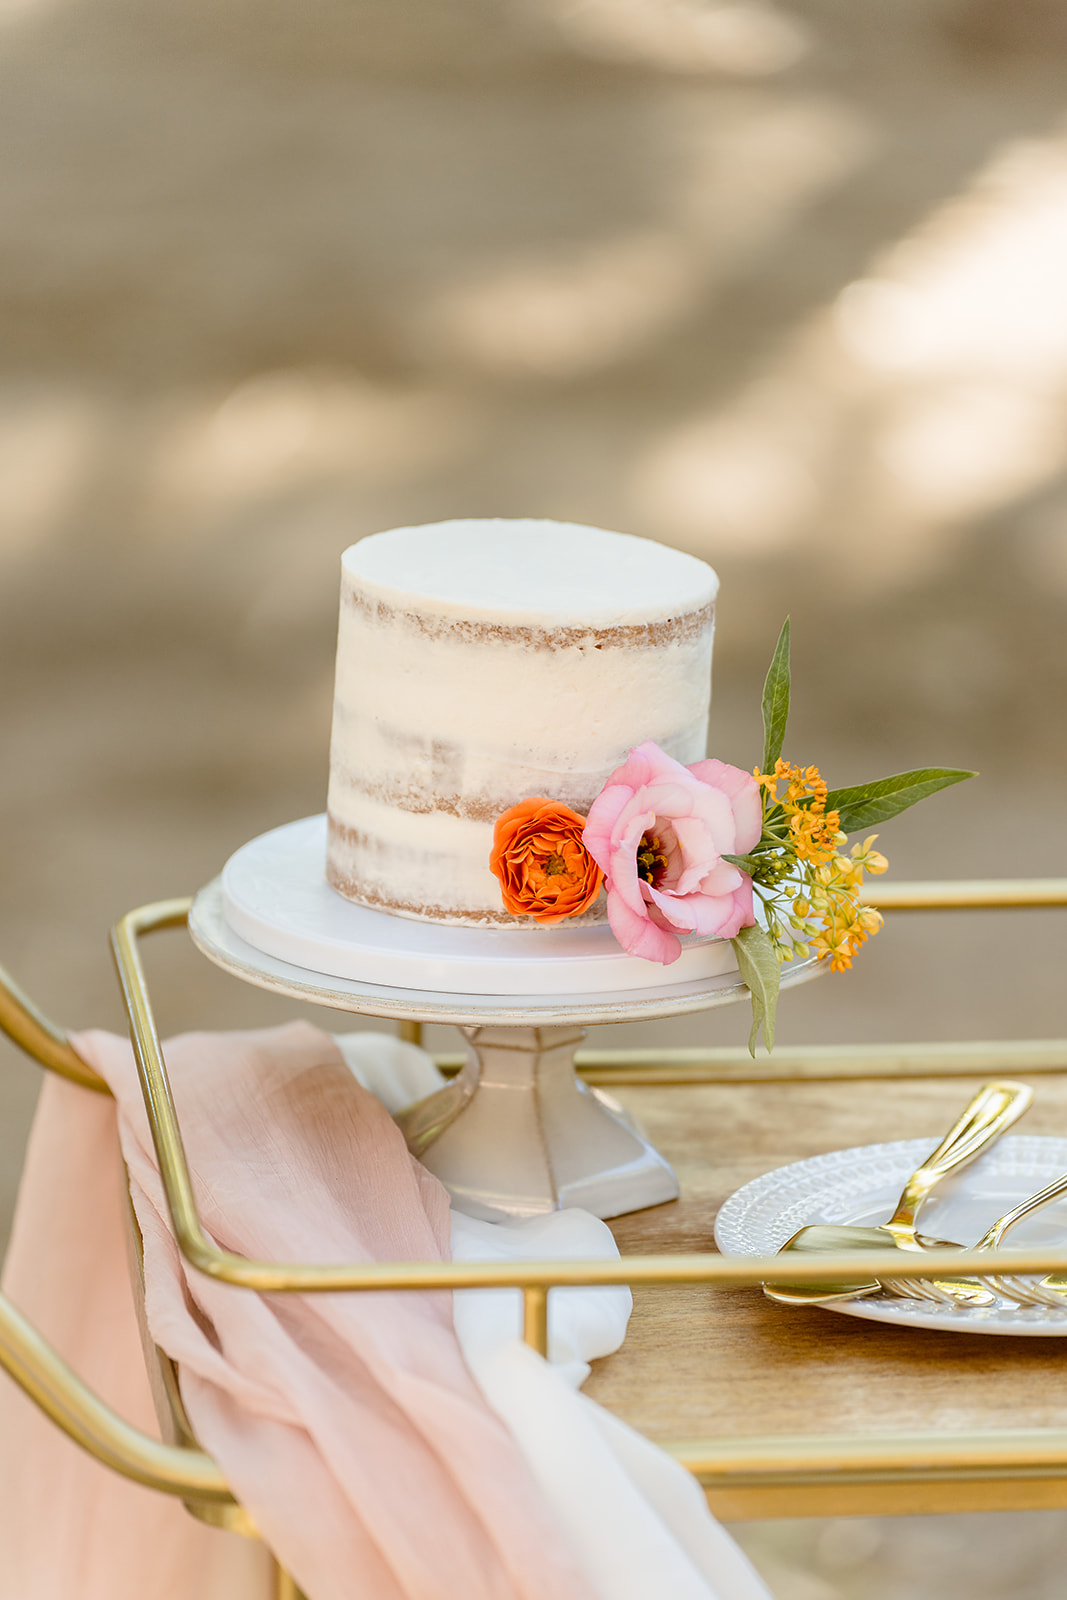 Wedding cake with vanilla frosting and flowers on tray next to gold utensils